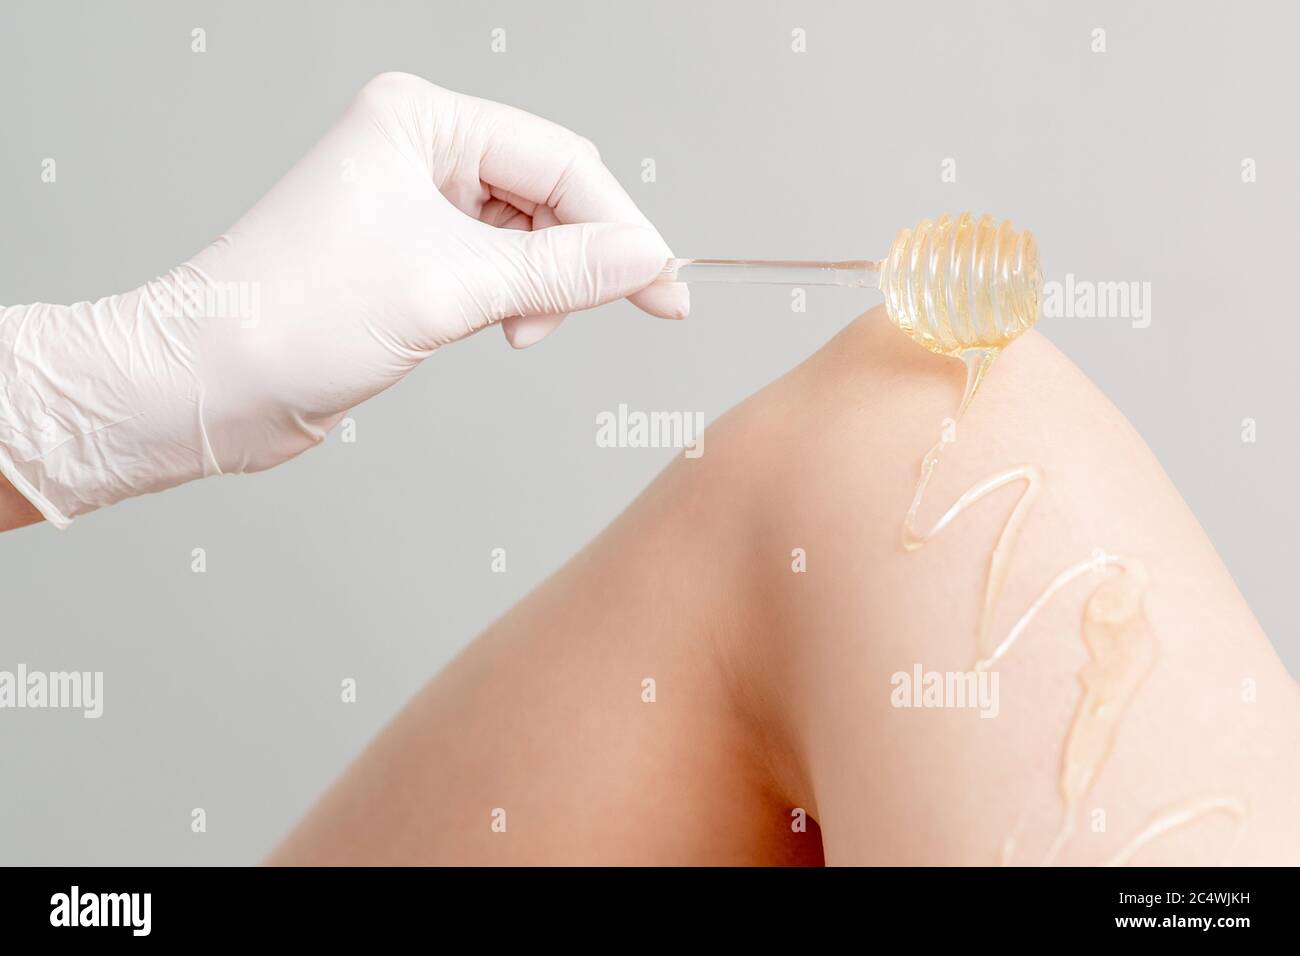 Wax on honey stick flowing down on female leg in human hand wearing protective glove on white background Stock Photo